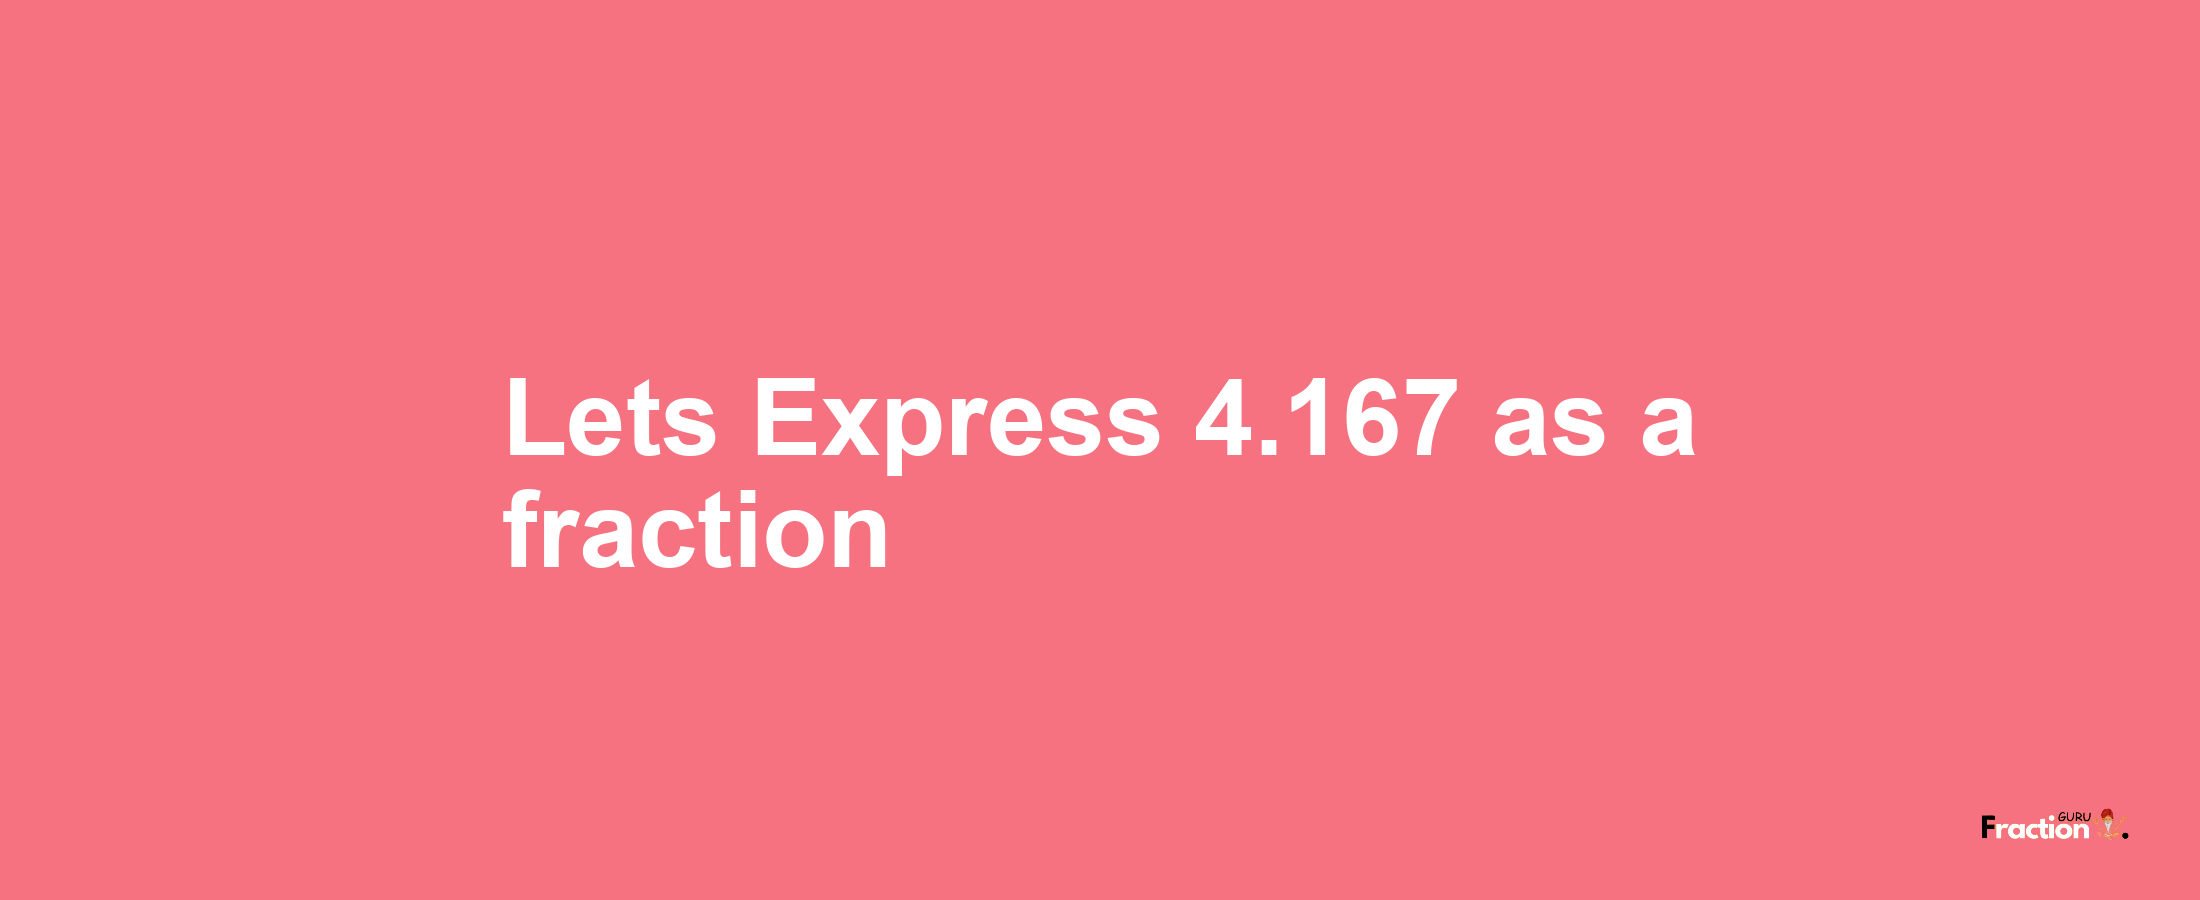 Lets Express 4.167 as afraction